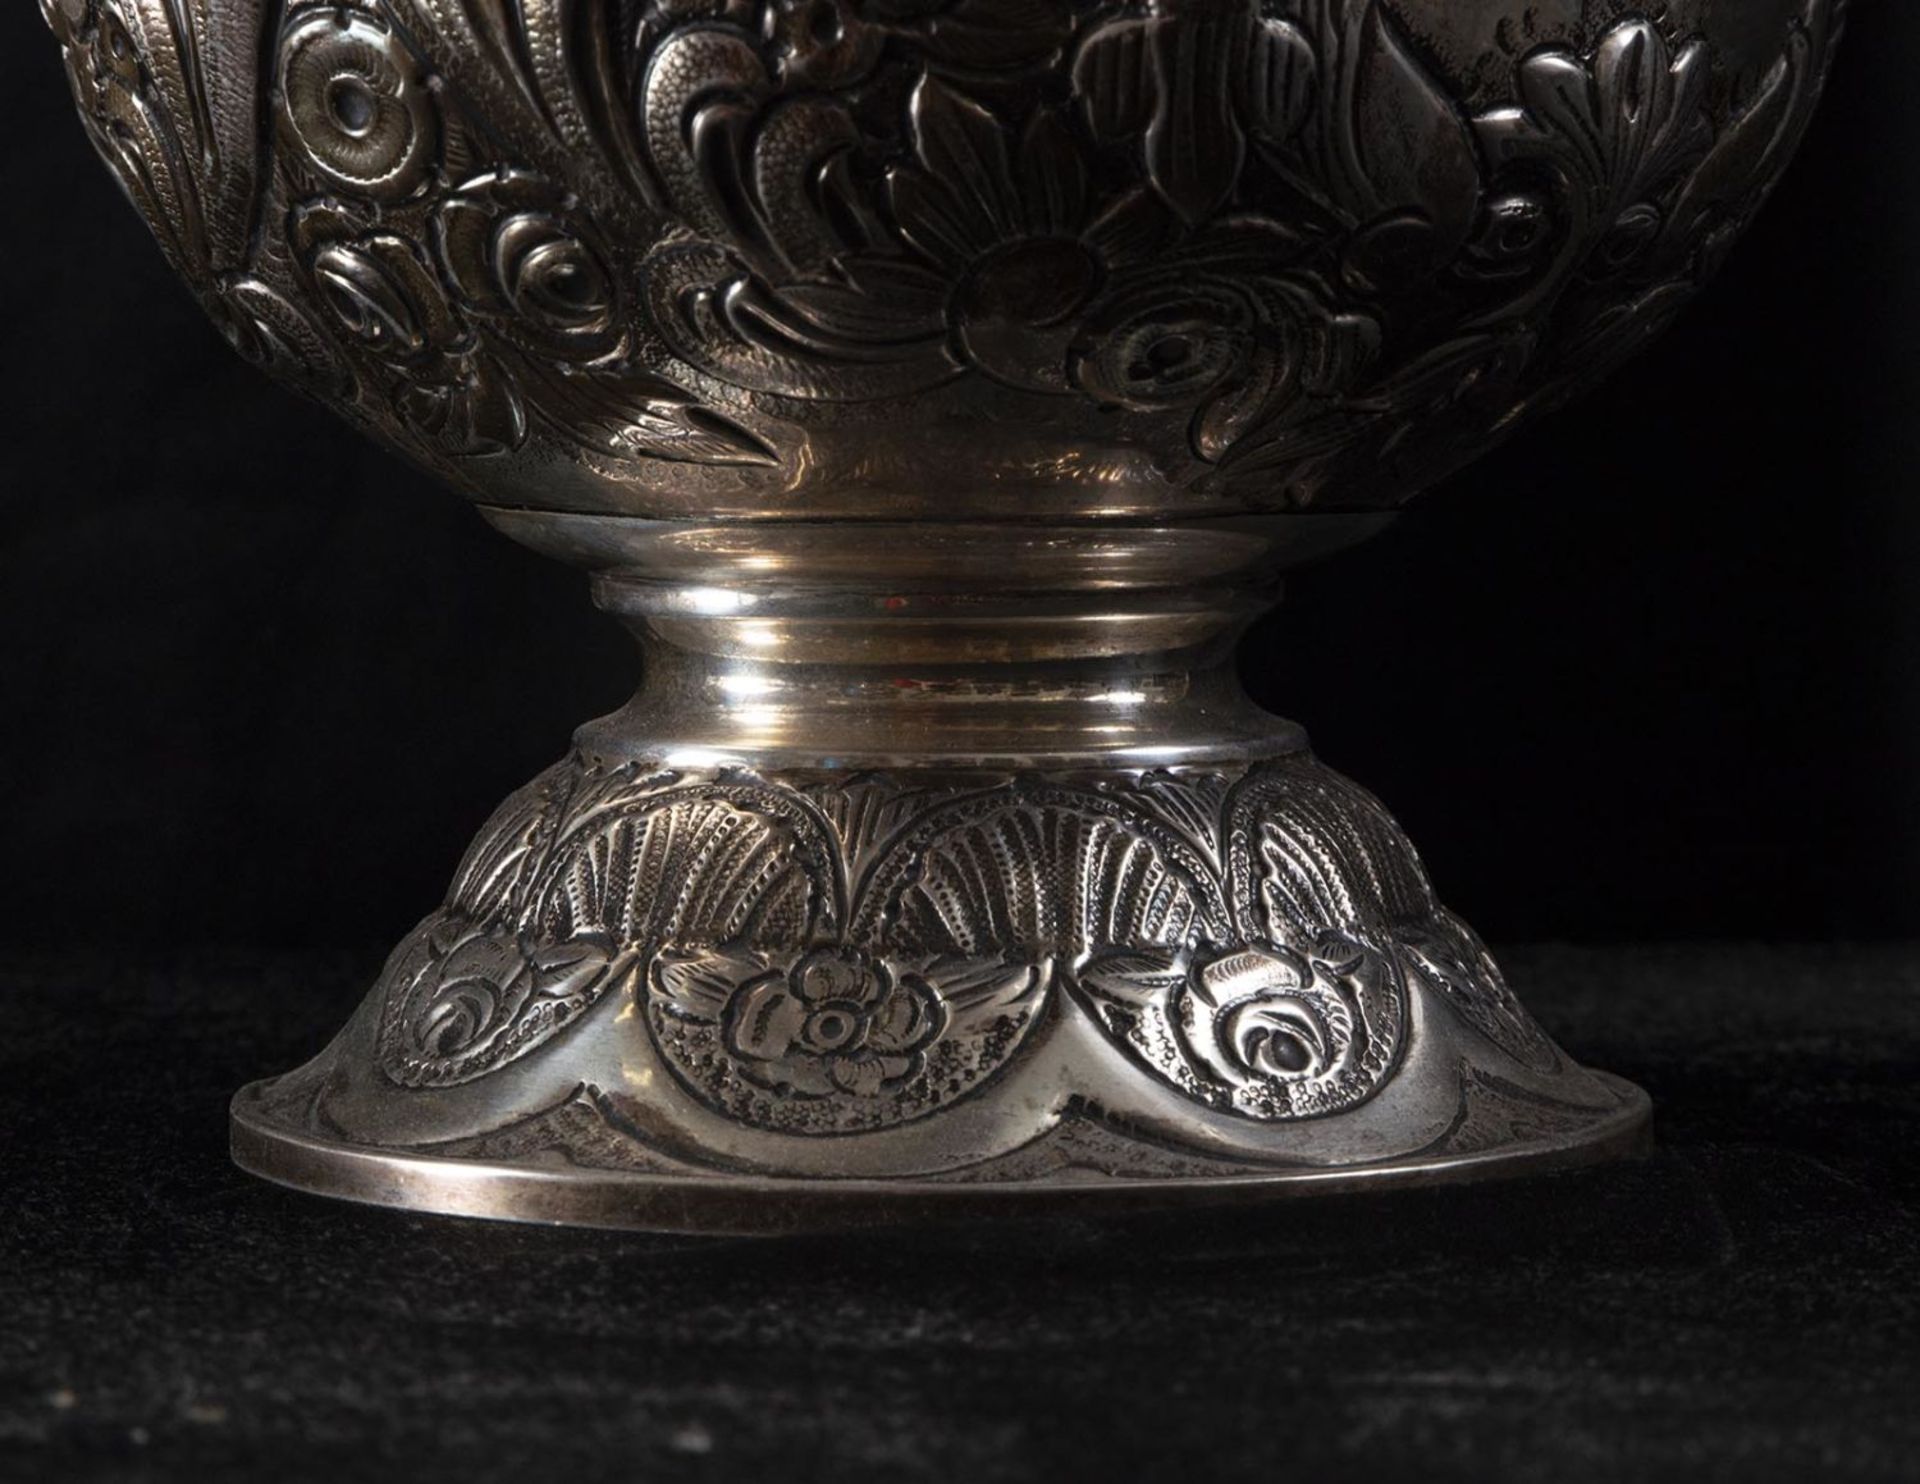 Large 925 Sterling Silver Jug, 19th century - Image 5 of 5